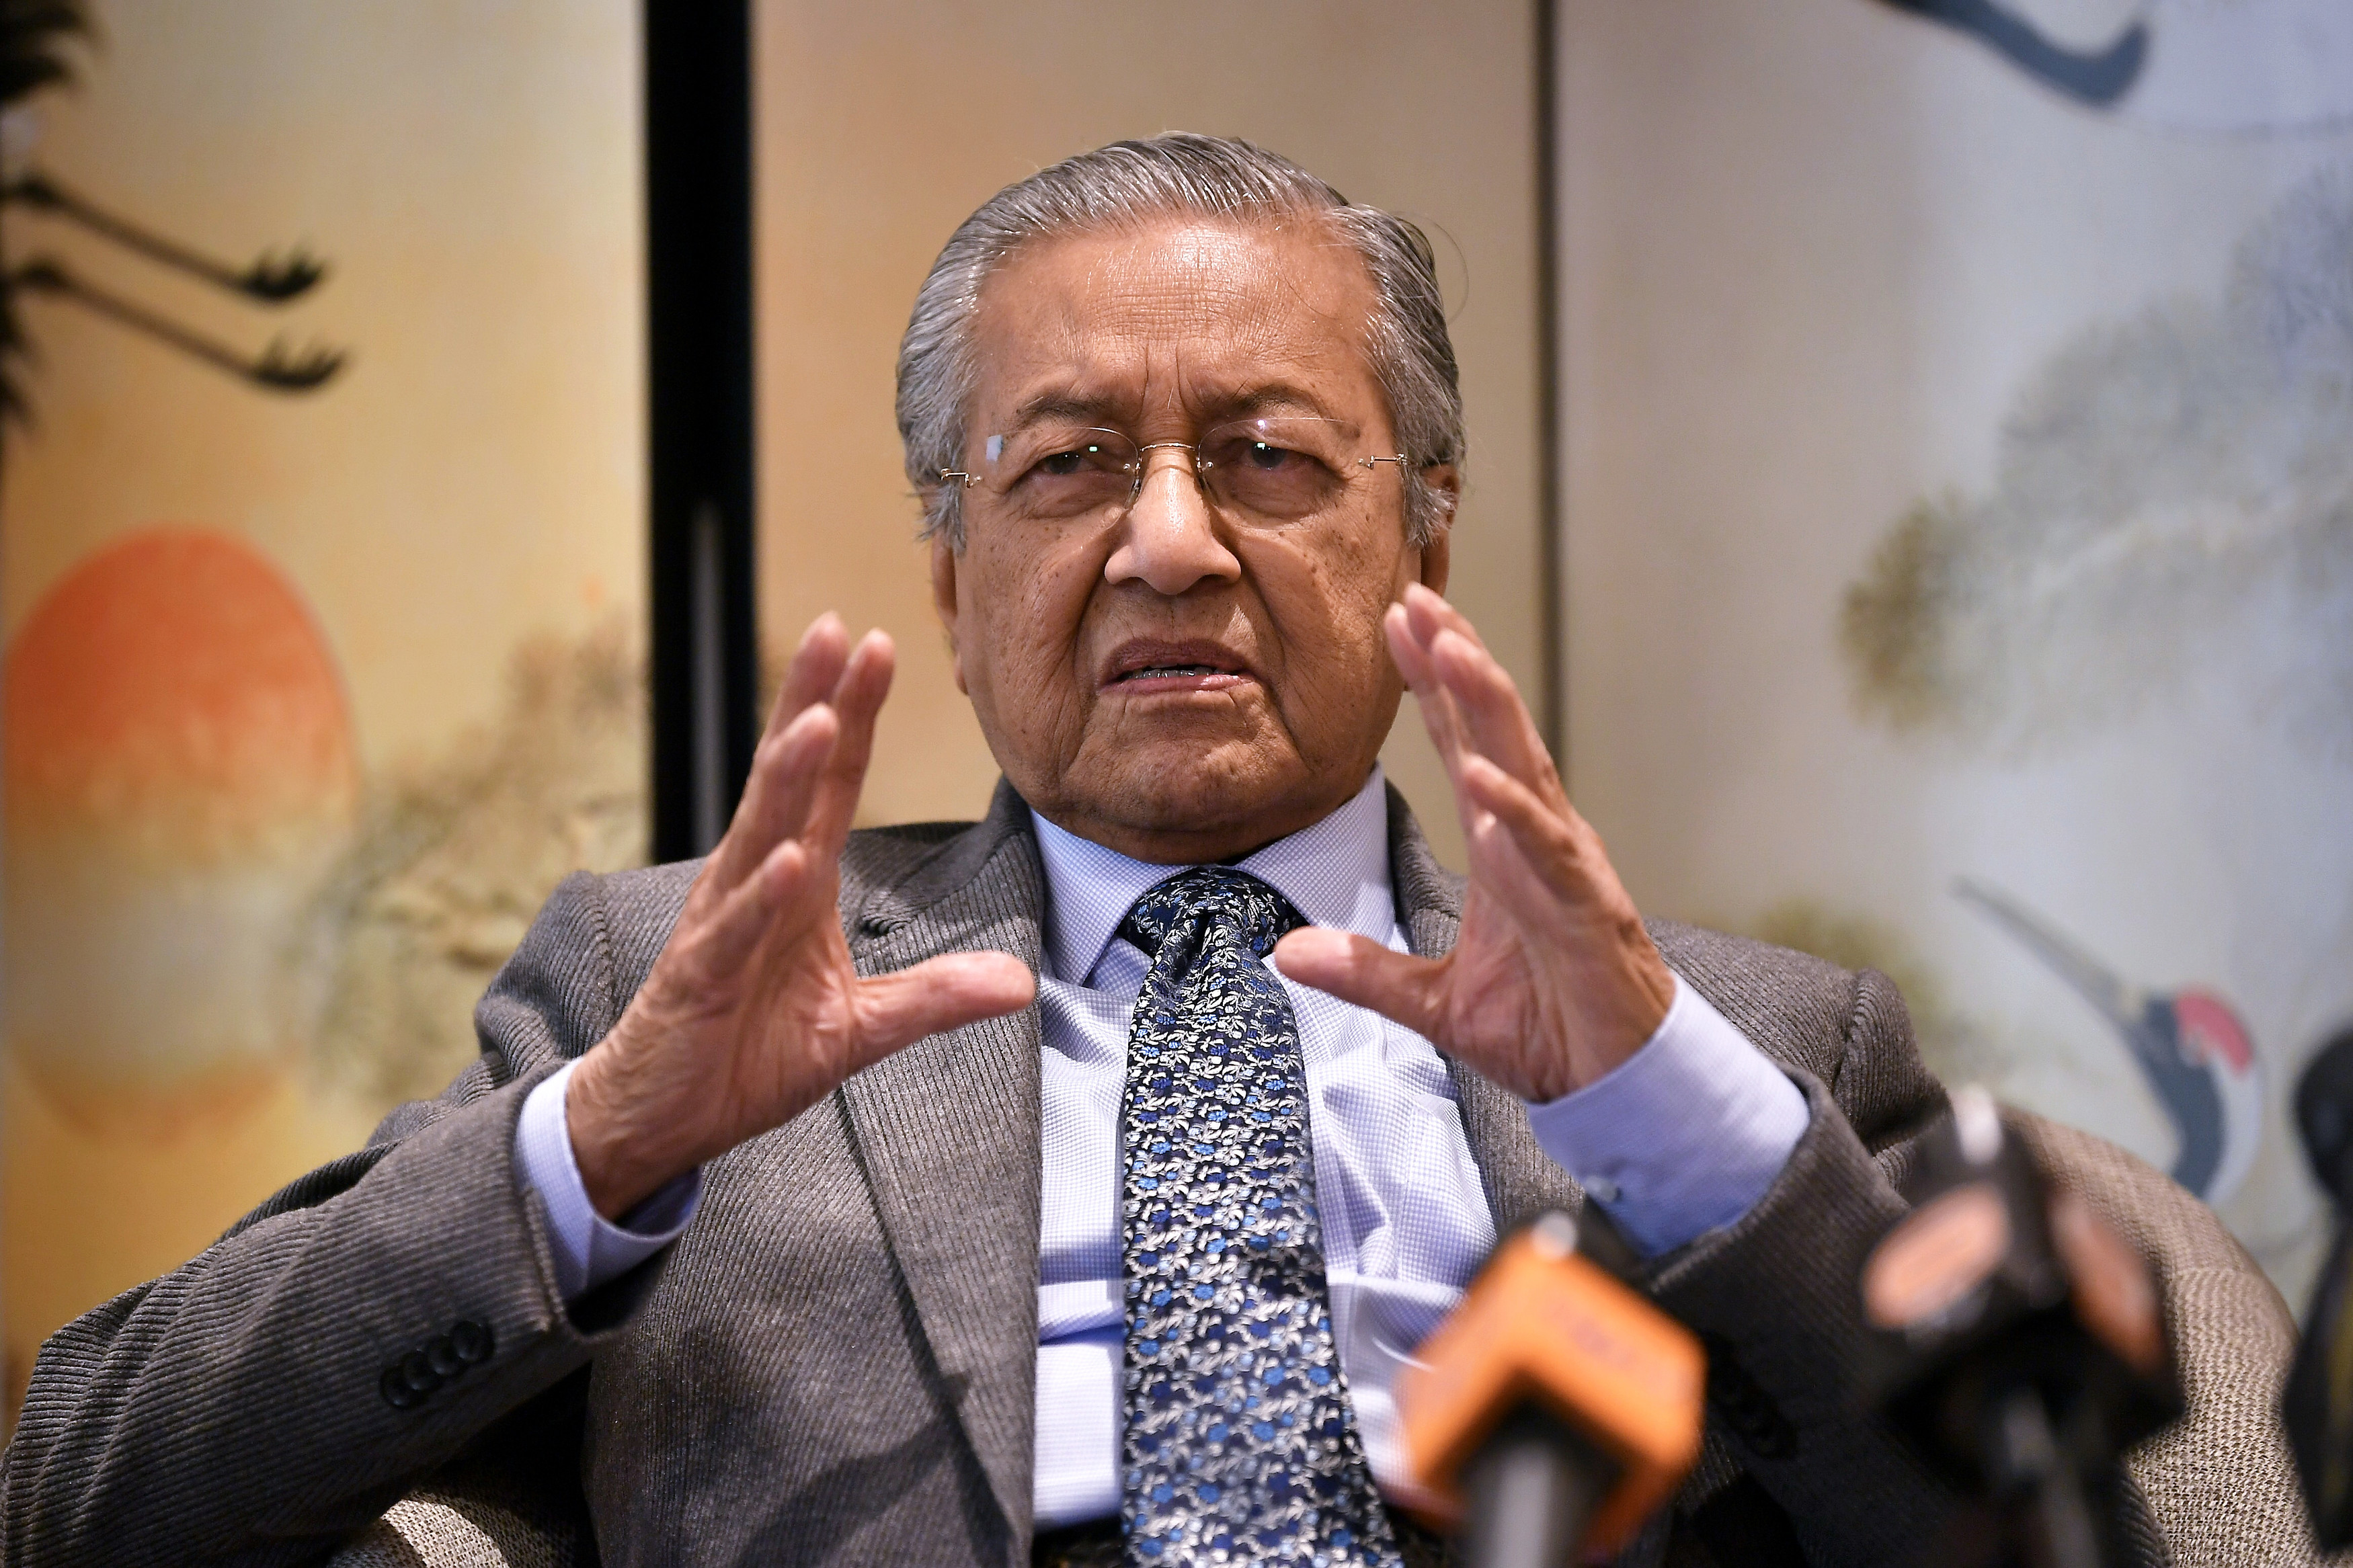 ECRL Negotiations By Previous Government Not Transparent – Dr Mahathir